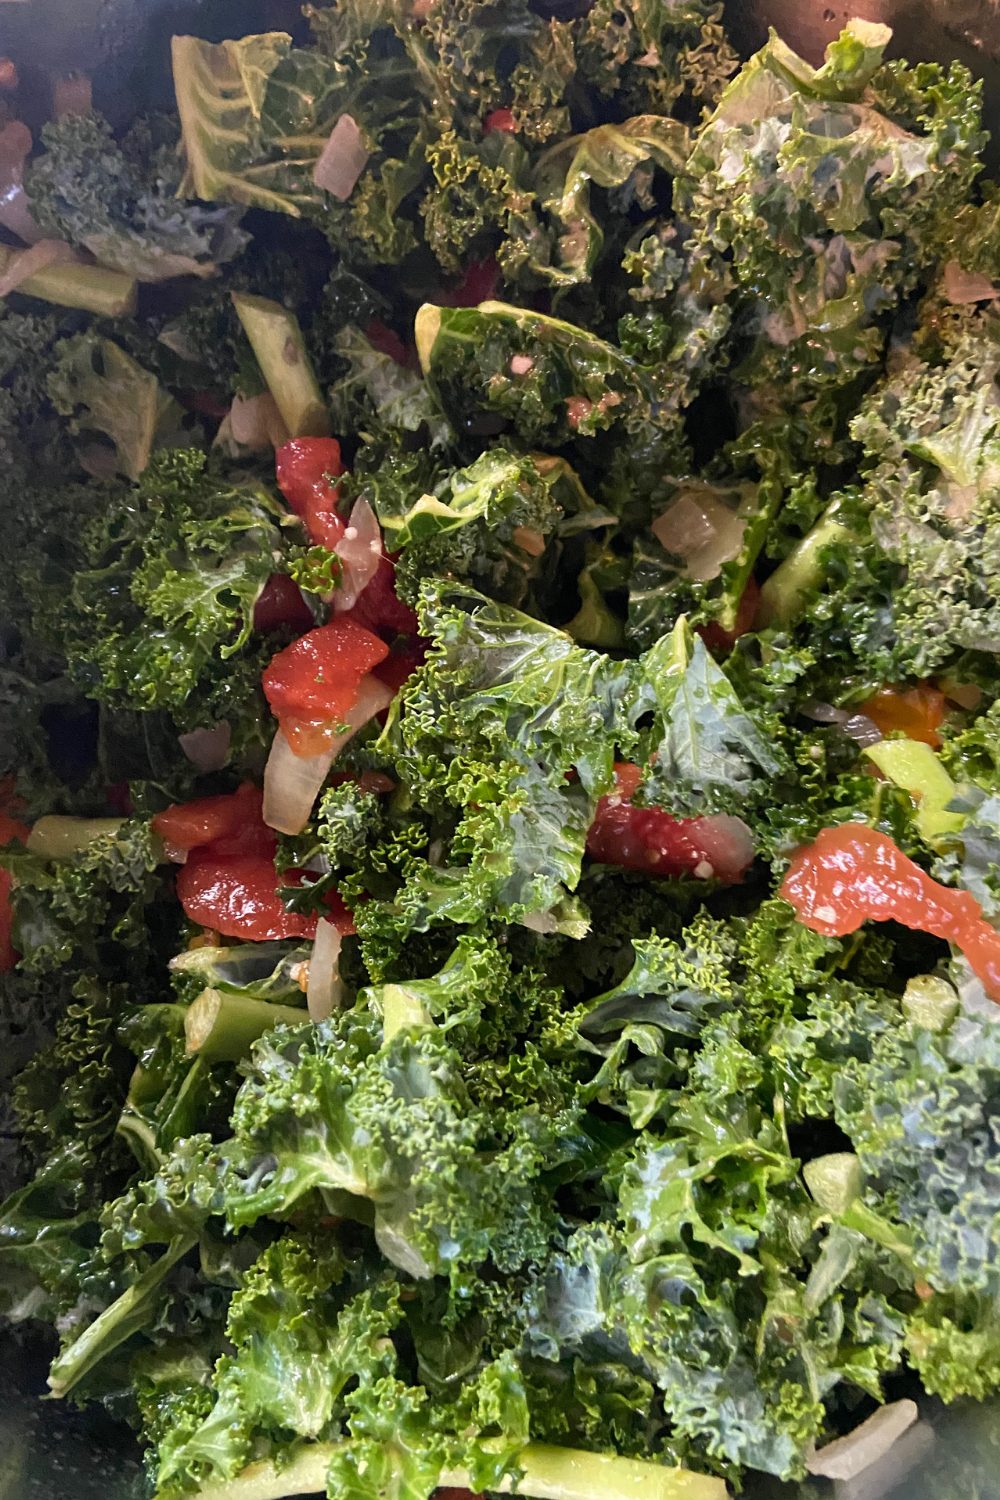 Instant Pot Tomato Braised Kale is a healthy side dish that takes just minutes to make. Braising the kale with tomatoes and onions gives it a tender texture. Follow these simple instructions for how to cook kale greens in an instant pot.